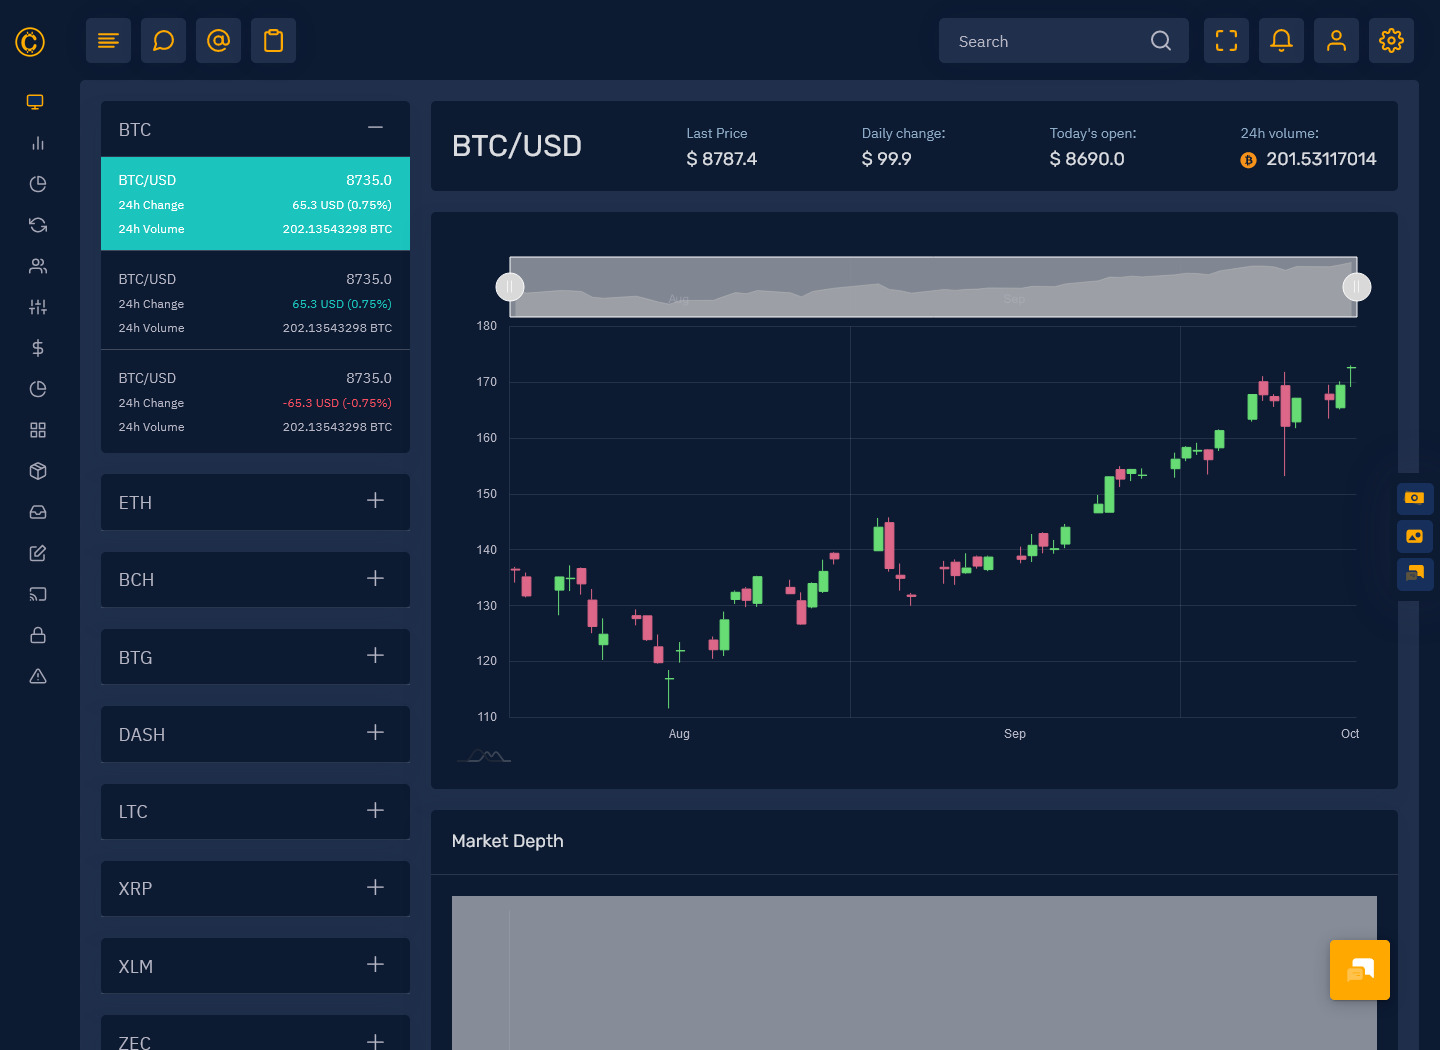 Cryptocurrency Dashboard Admin Template